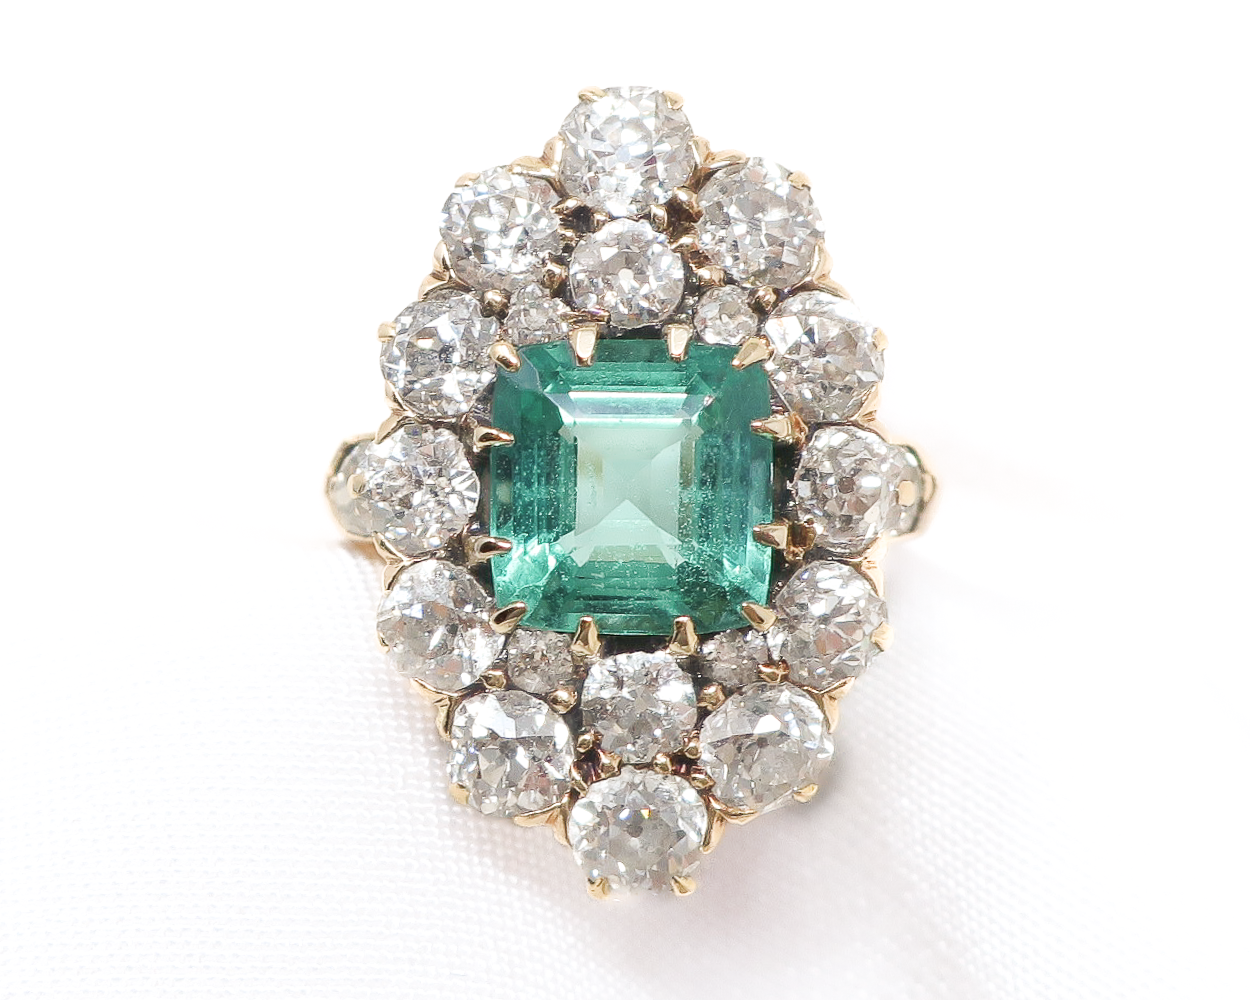 Late-Victorian Emerald and Diamond Navette Ring